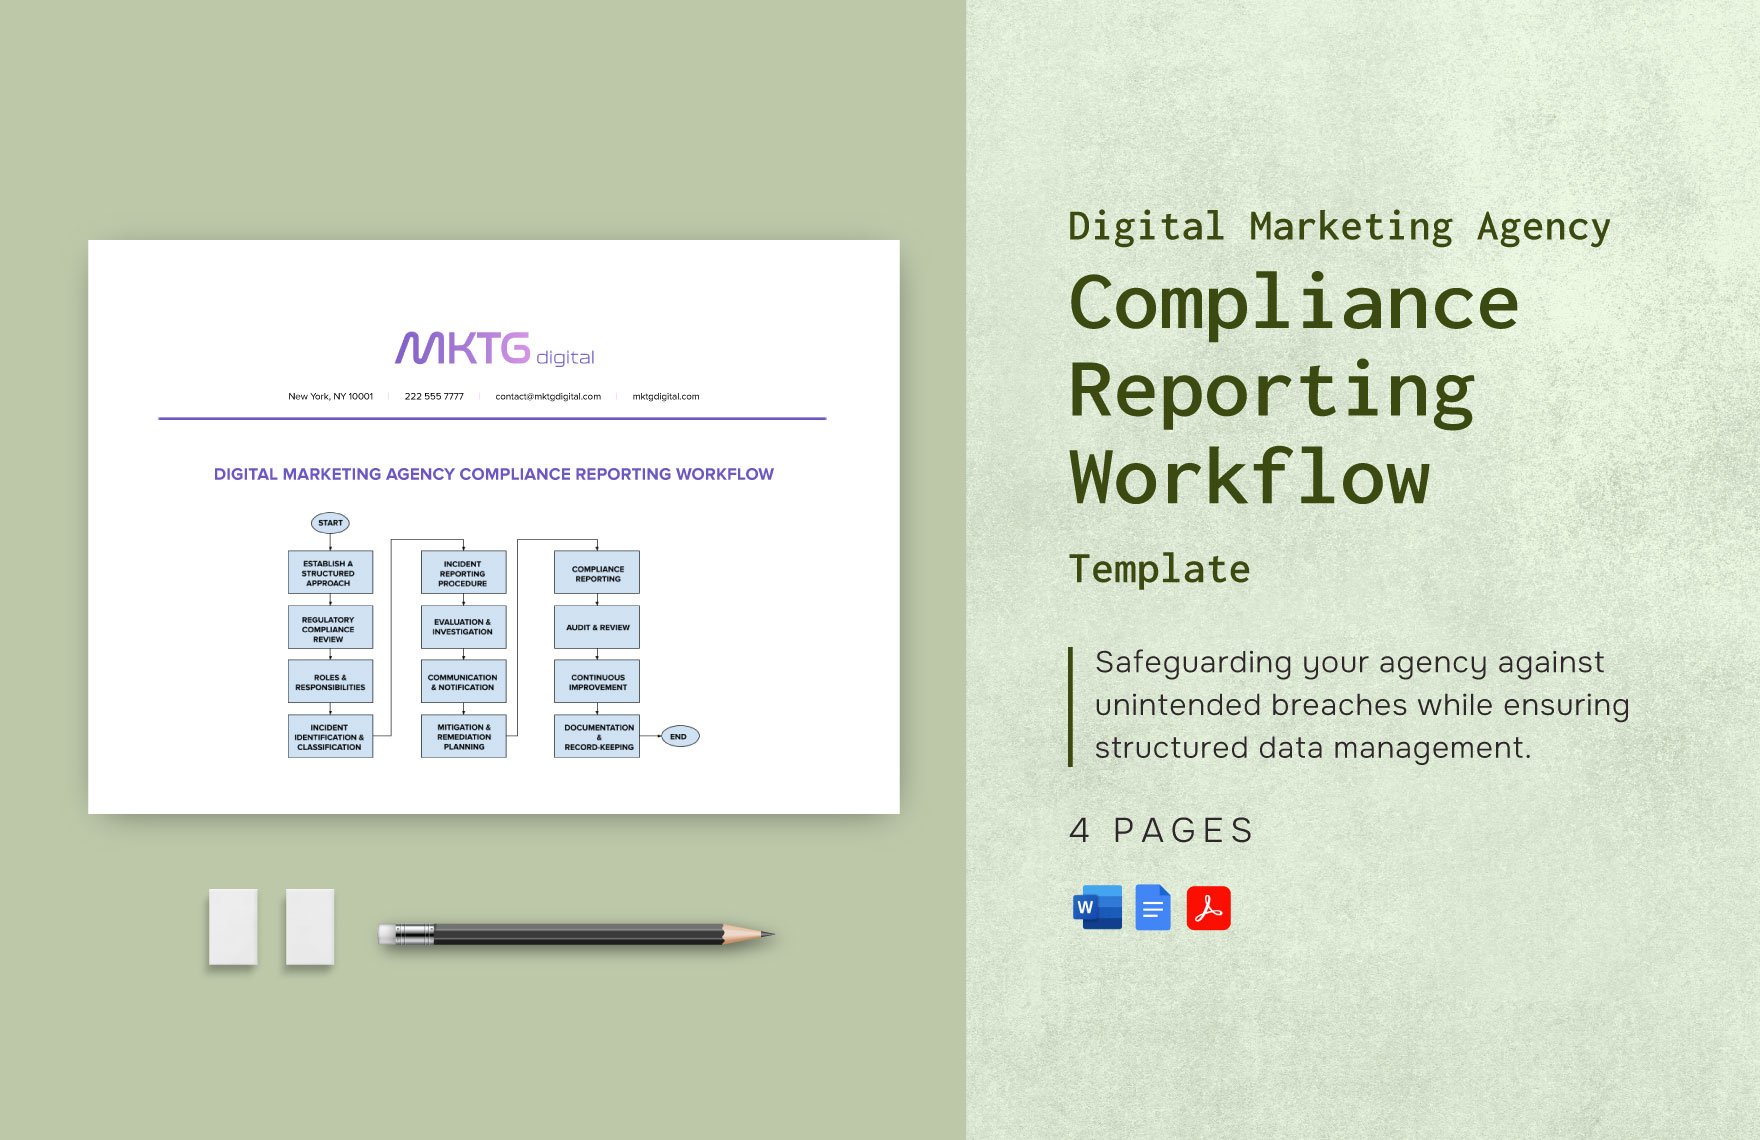 Digital Marketing Agency Compliance Reporting Workflow Template